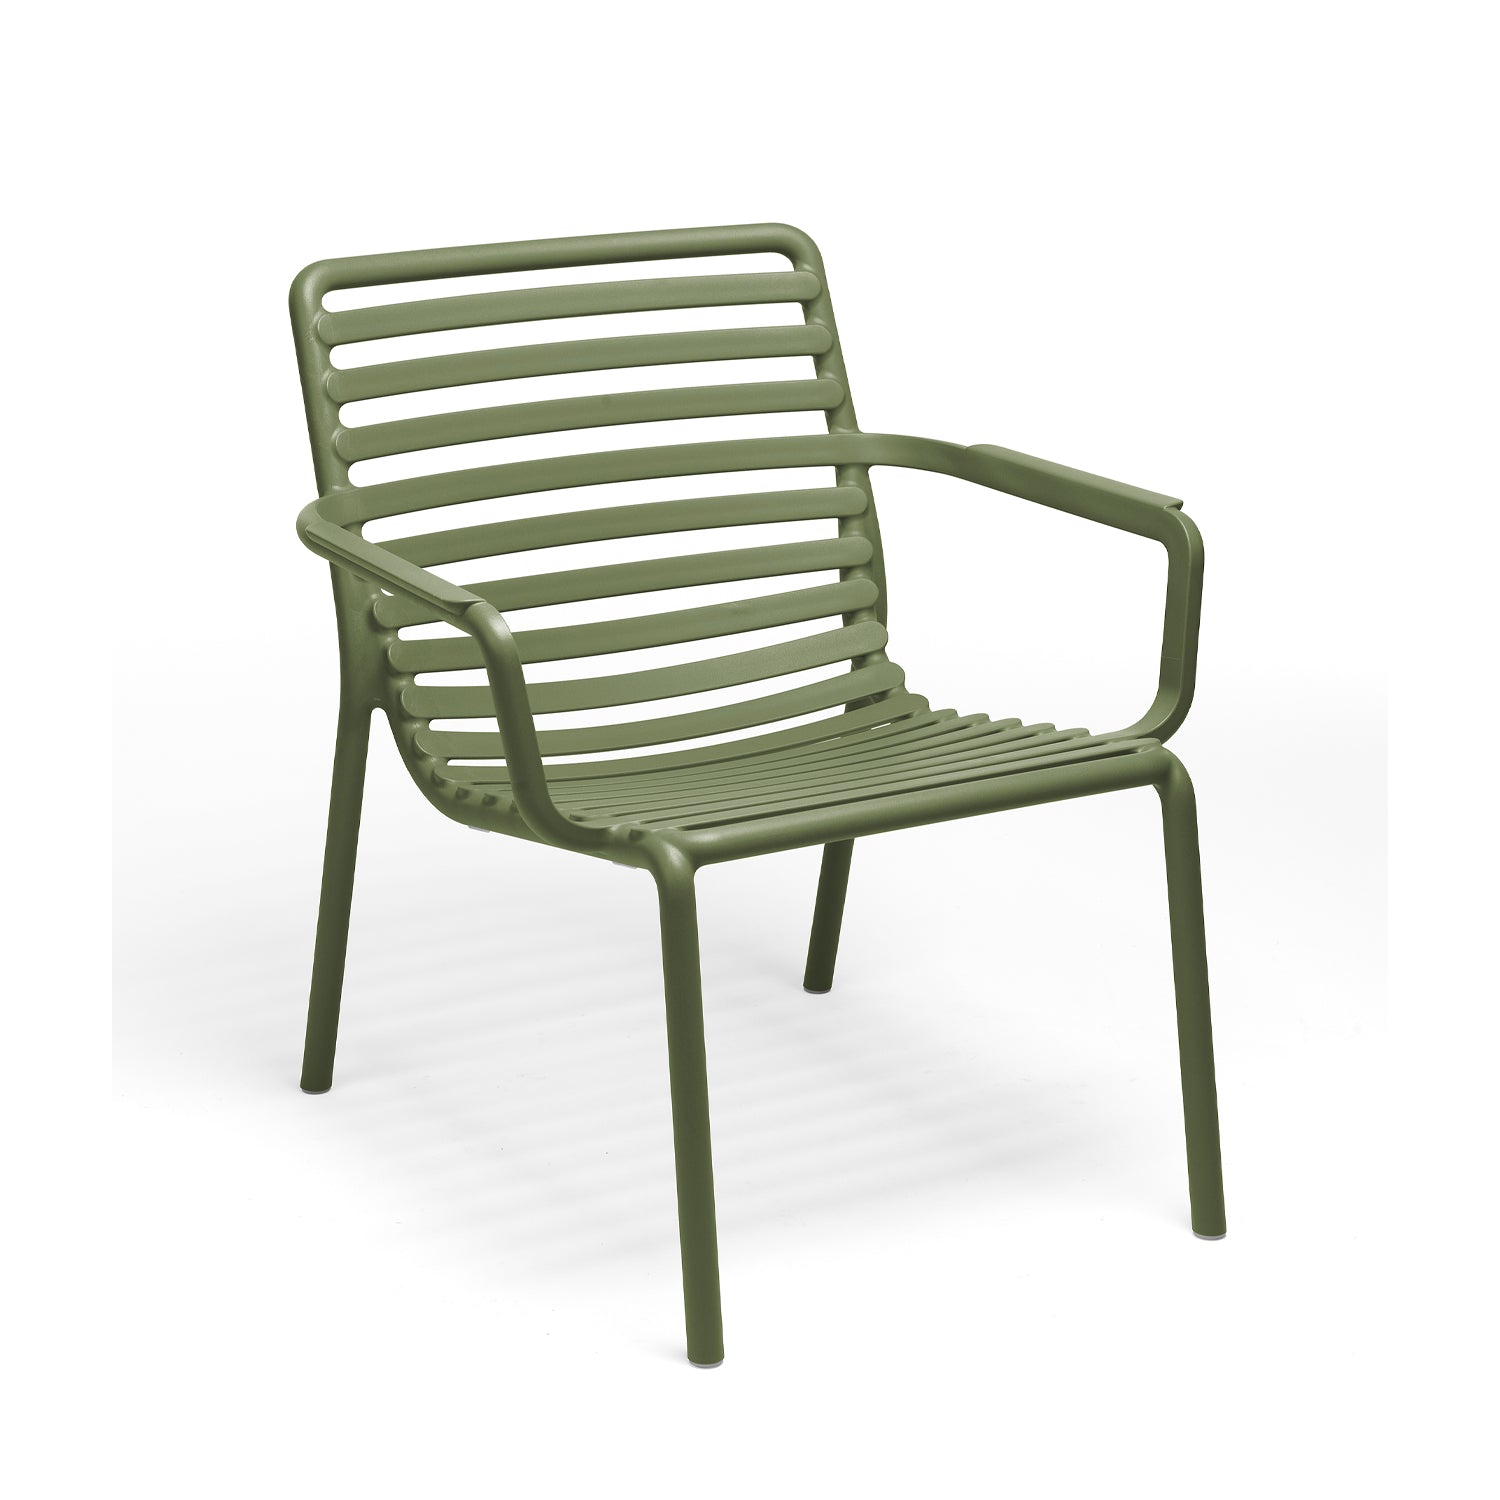 Doga Relax Garden Chair By Nardi - Set Of 4 Olive